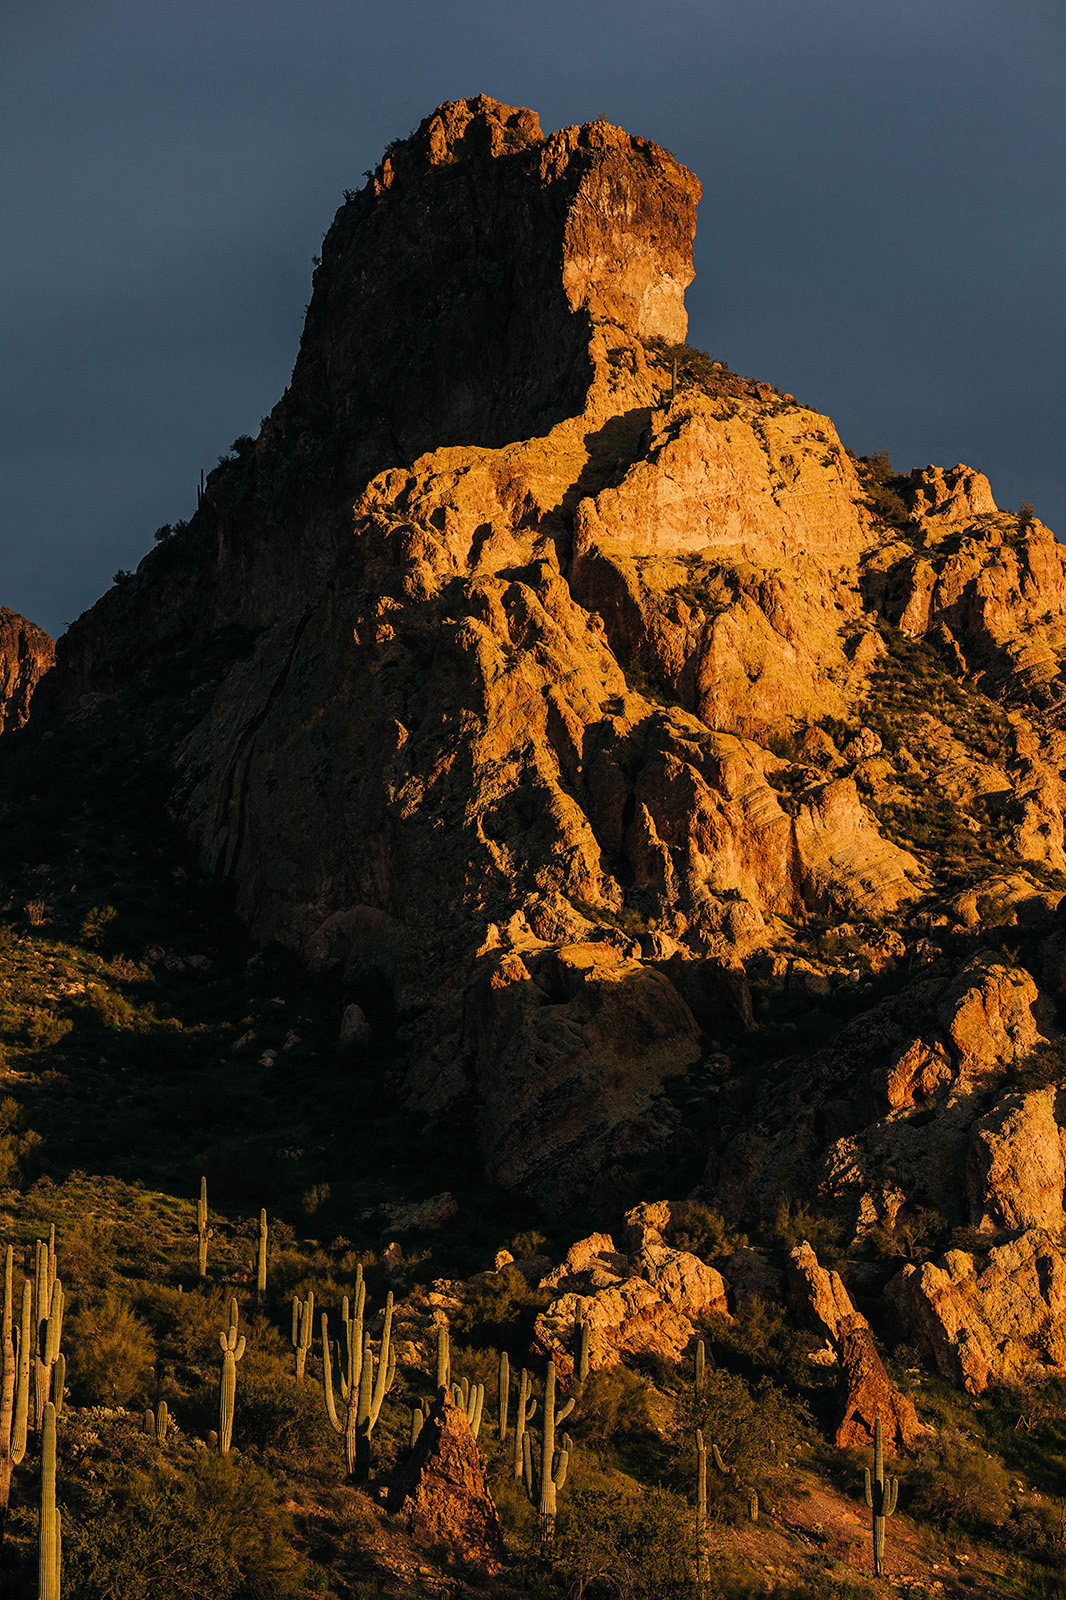 Photo by Diana Lustig  |  The sun setting creates dramatic shadows on the mountains in the Salt River area.